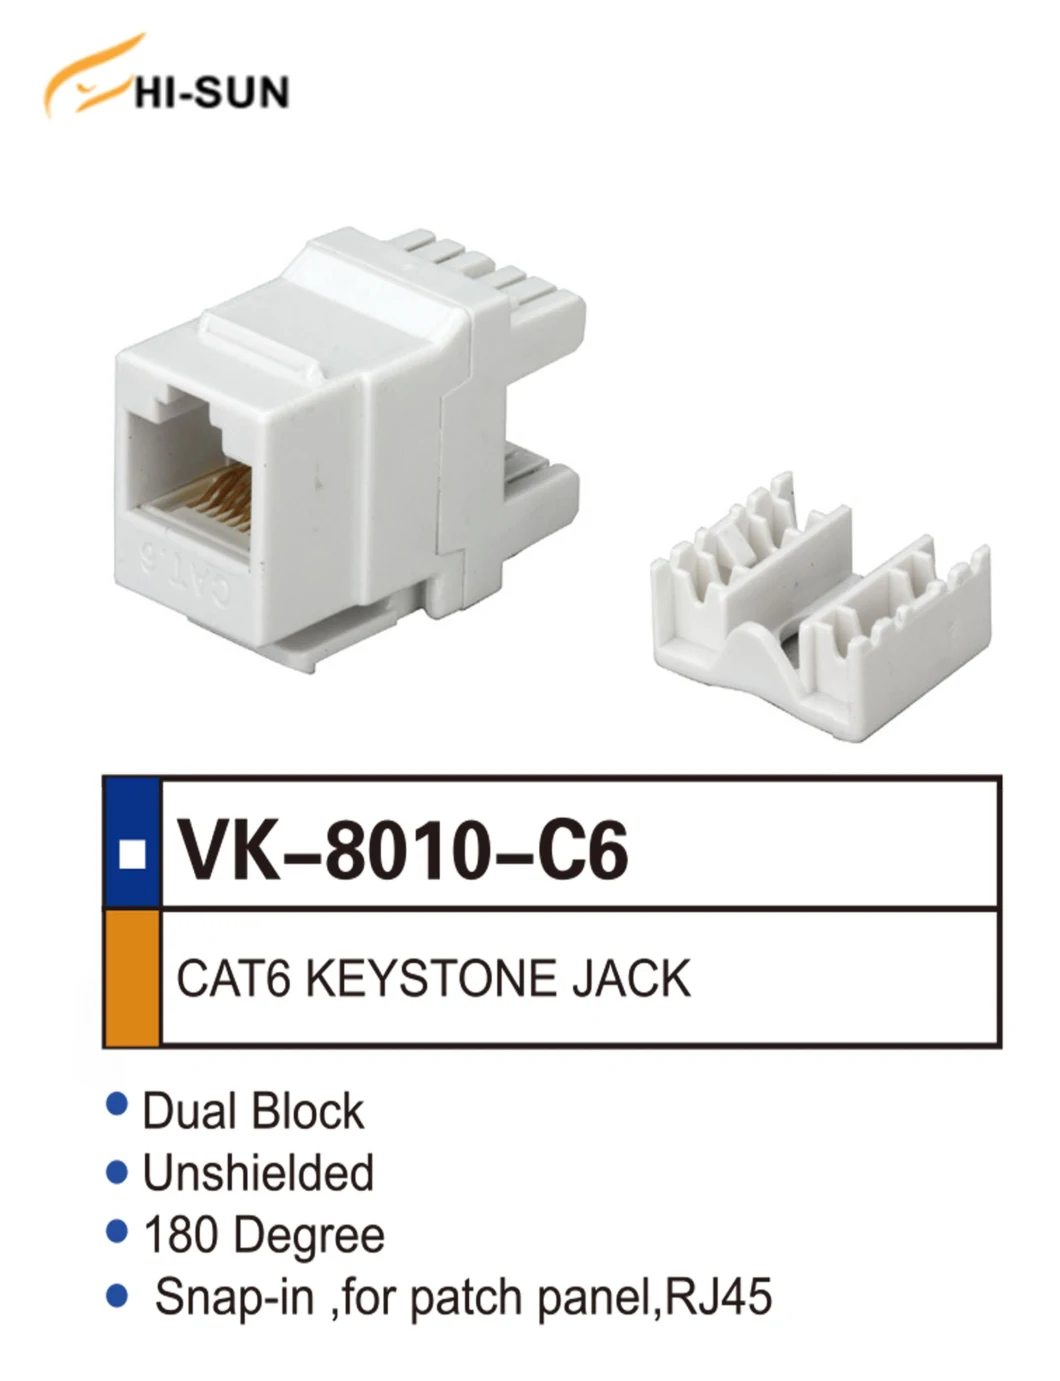 Dual Block Unshielded 180 Degree CAT6 Keystone Jack Snap-in for Patch Panel RJ45